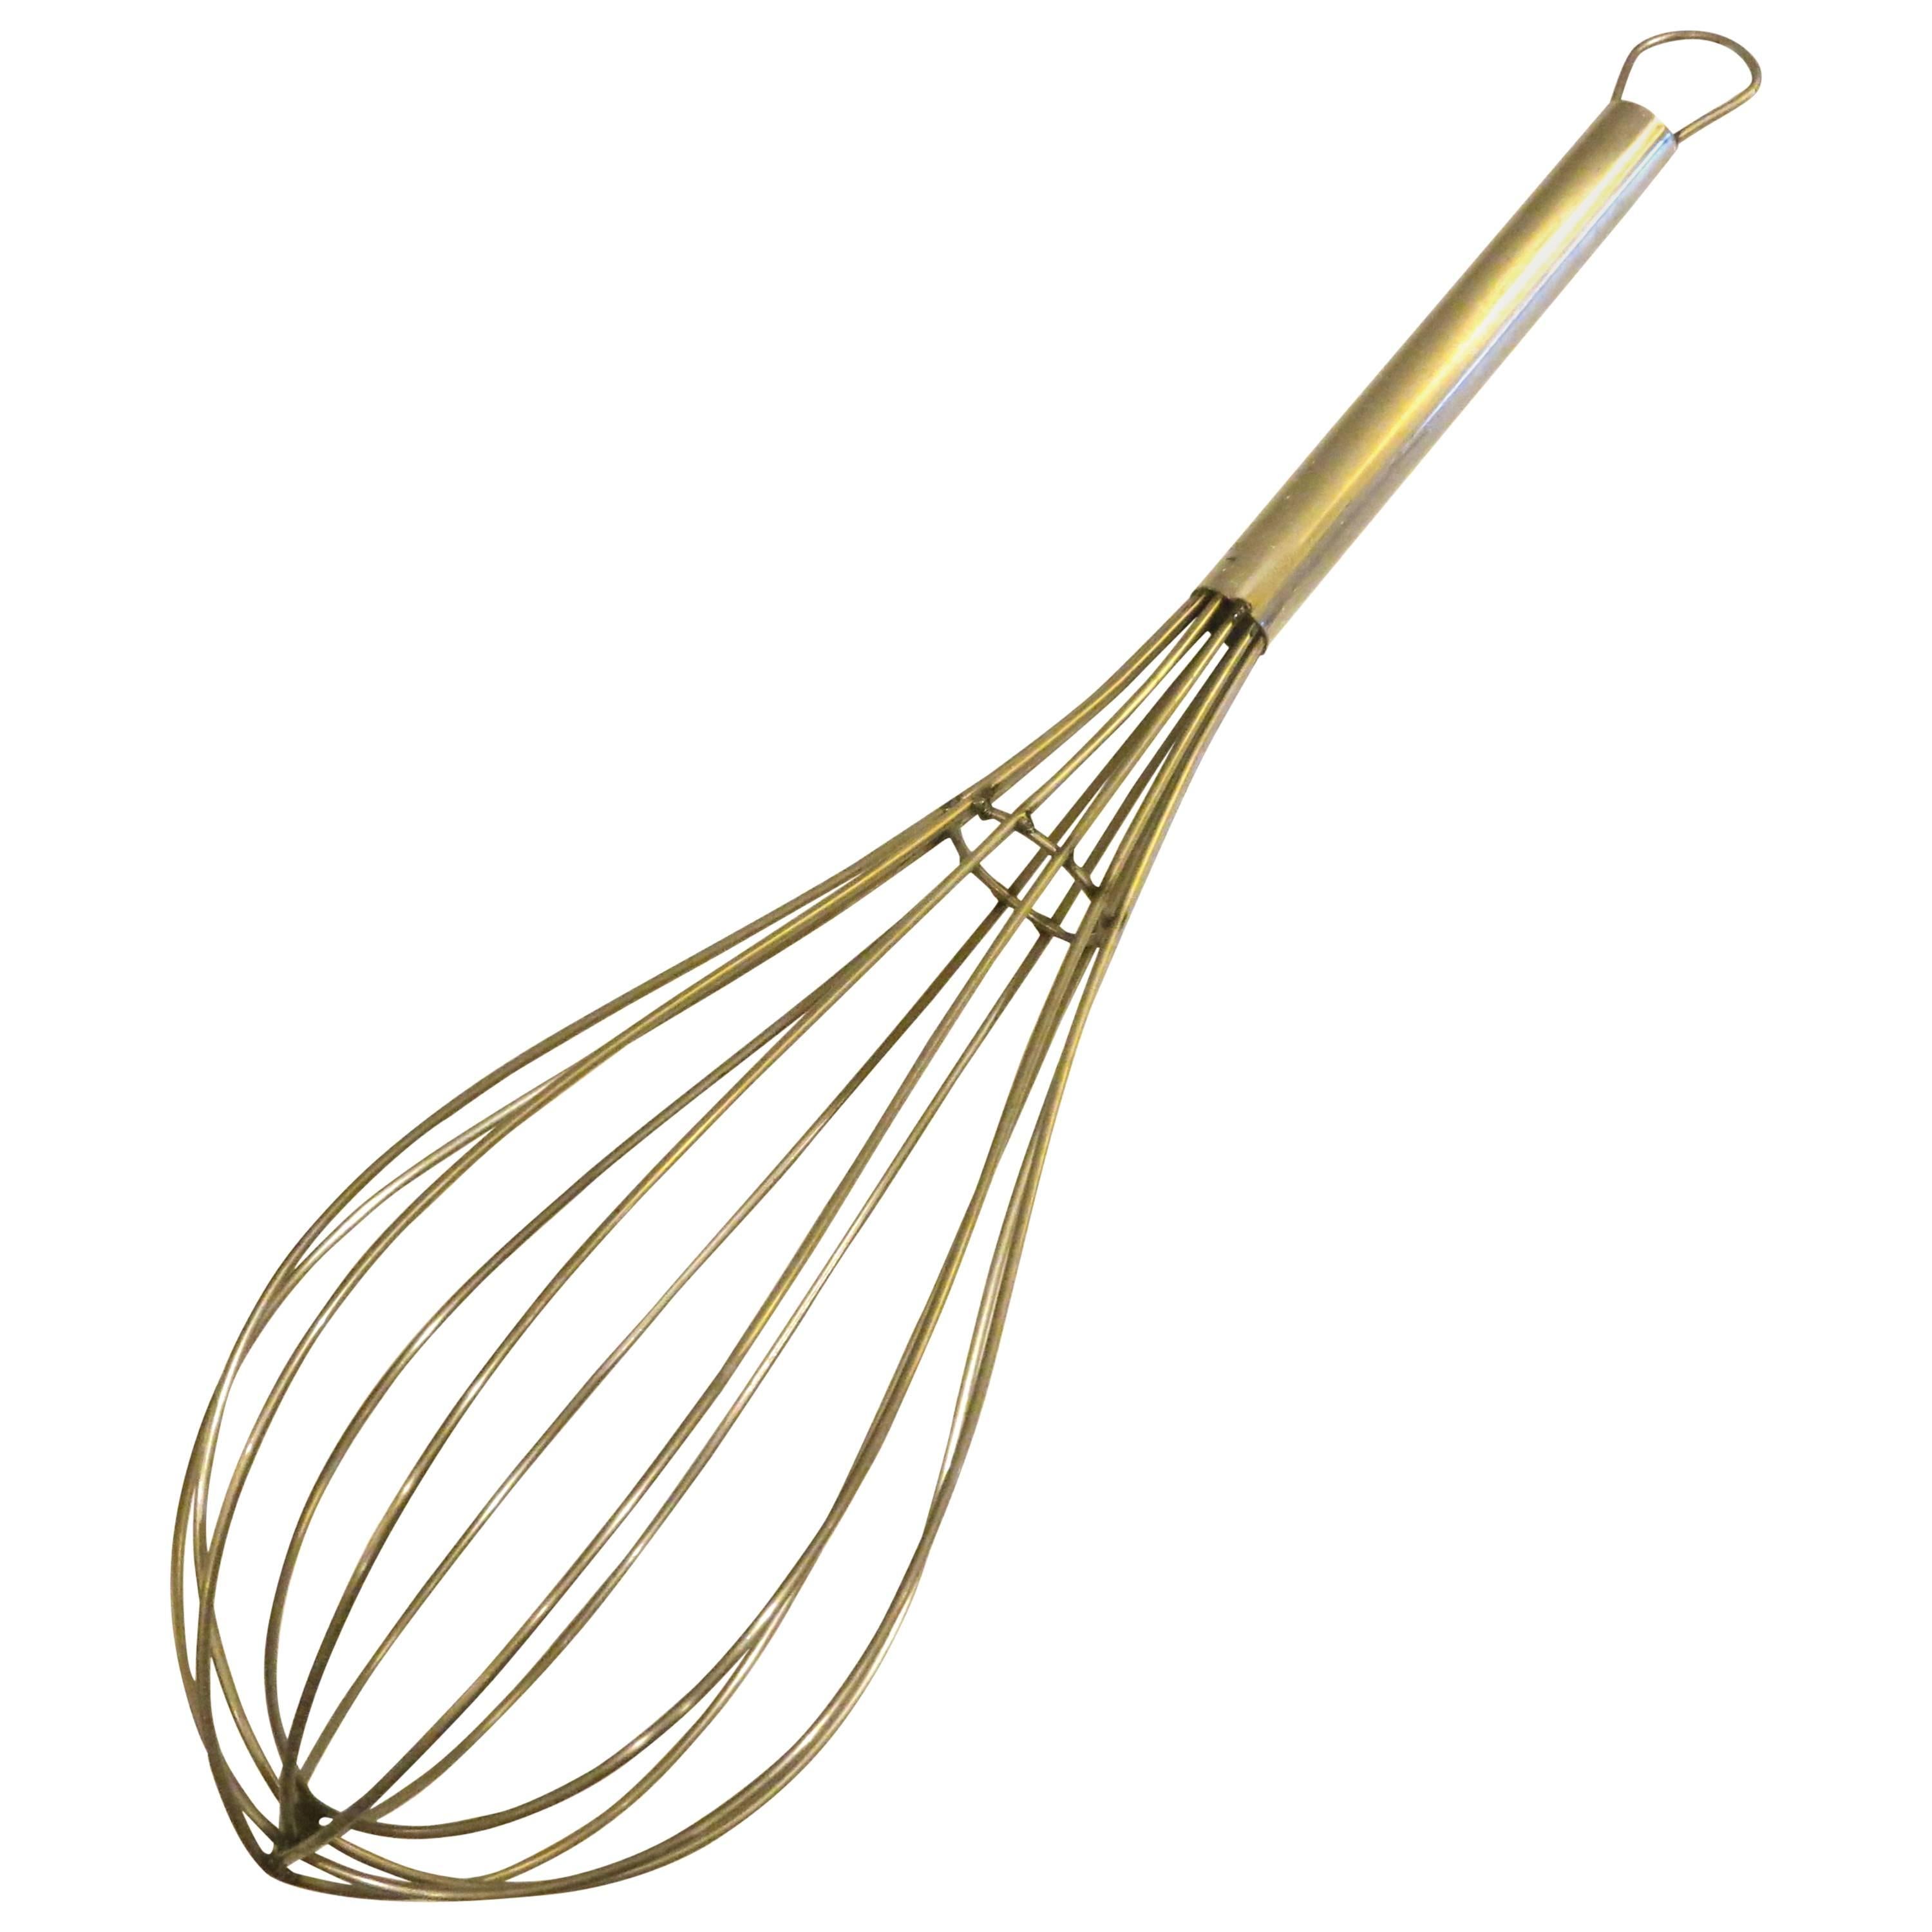 1970s Pop Postmodern Era Stainless Steel Extra Large Decorative Giant Whisk